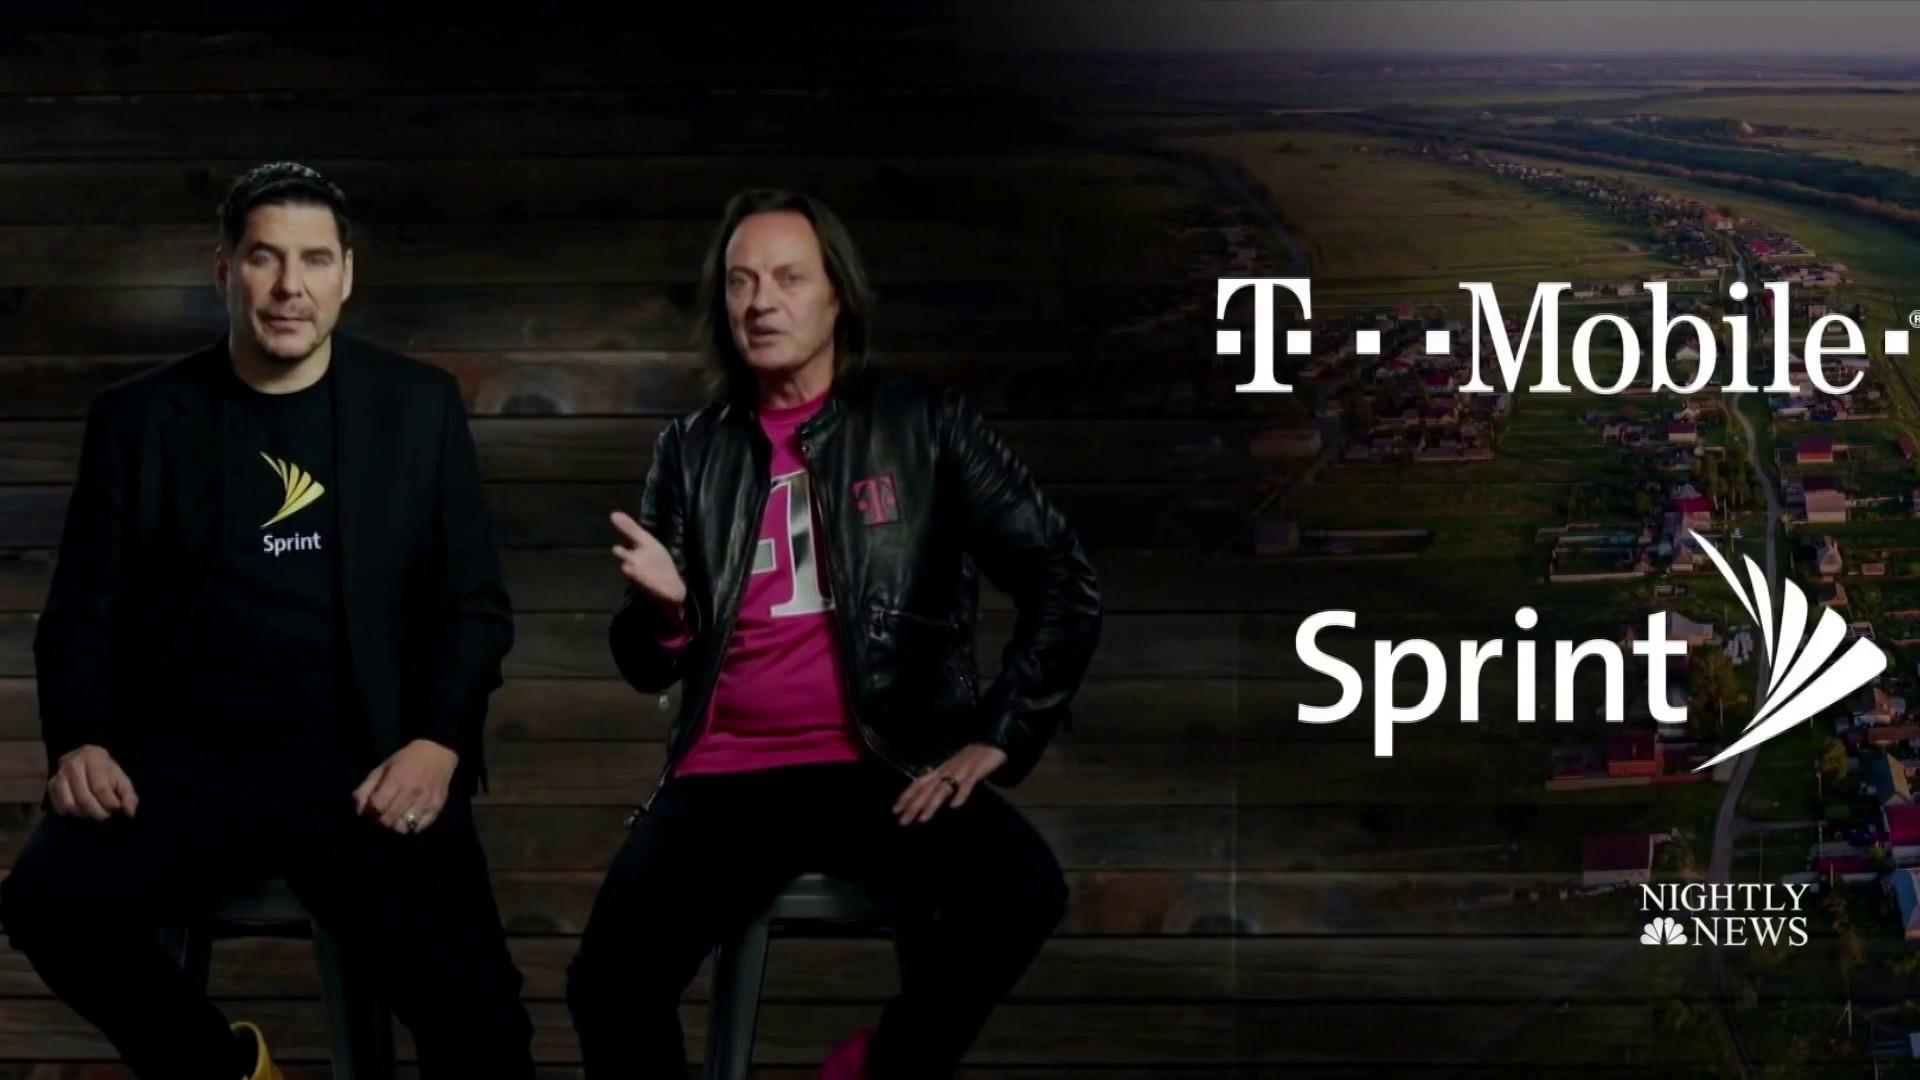 Sprint and T-Mobile to combine in deal that could reshape the U.S. wireless landscape